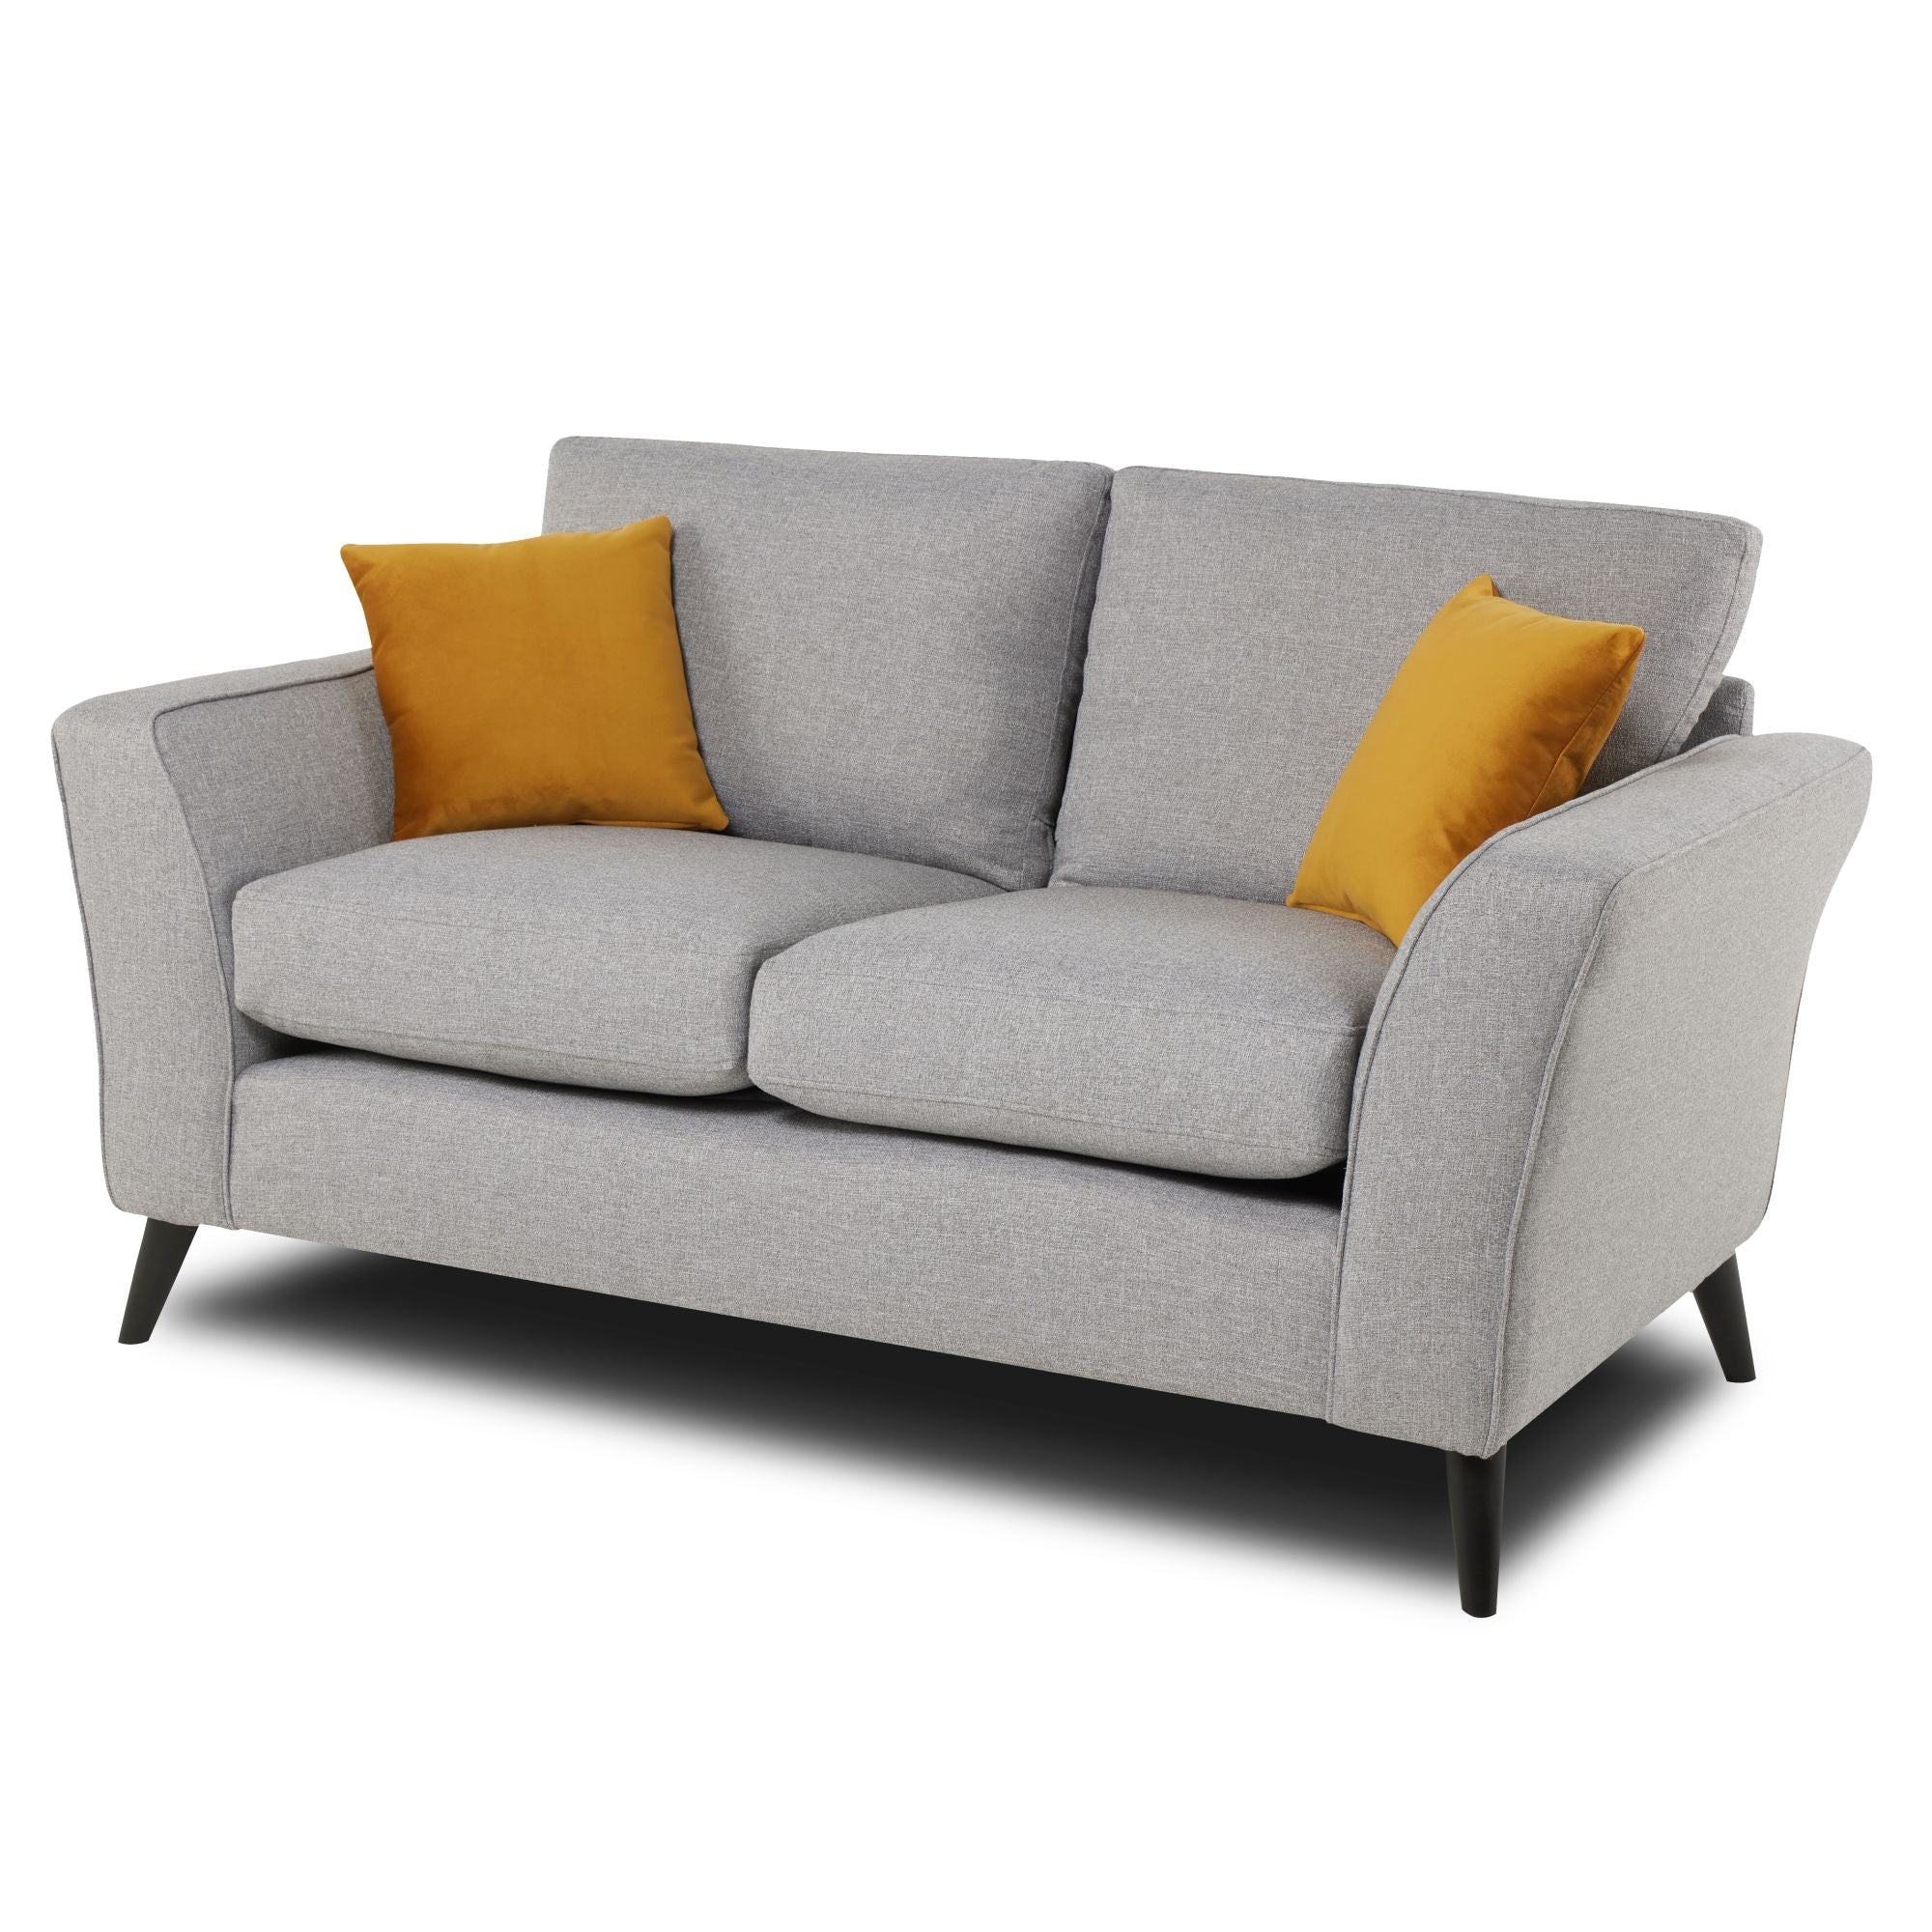 libby 2 seater sofa in silver shown on an angle with a white background 